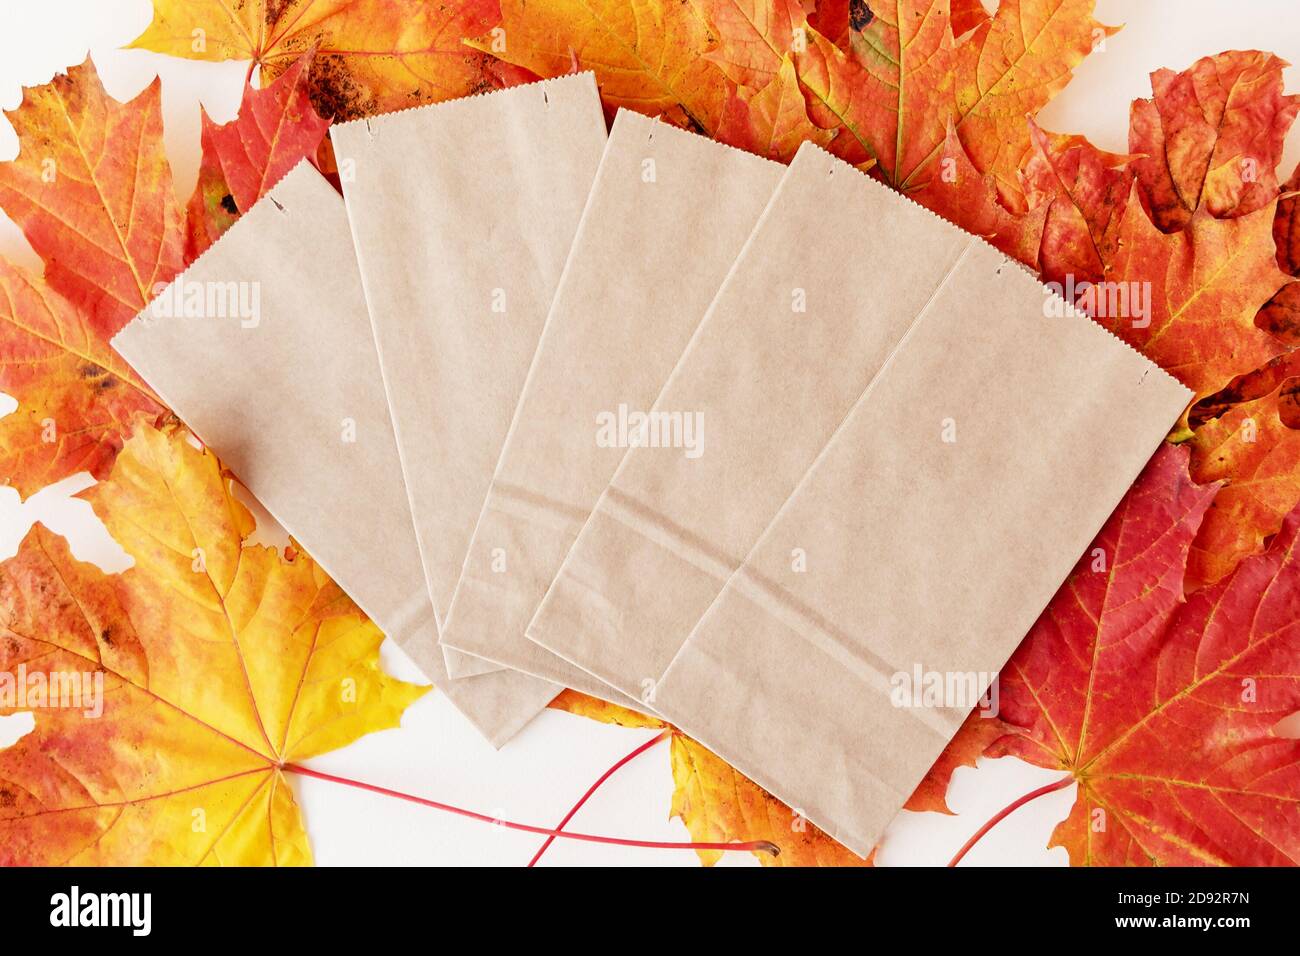 Empty paper bags on pile of dry autumn leaves on white Stock Photo